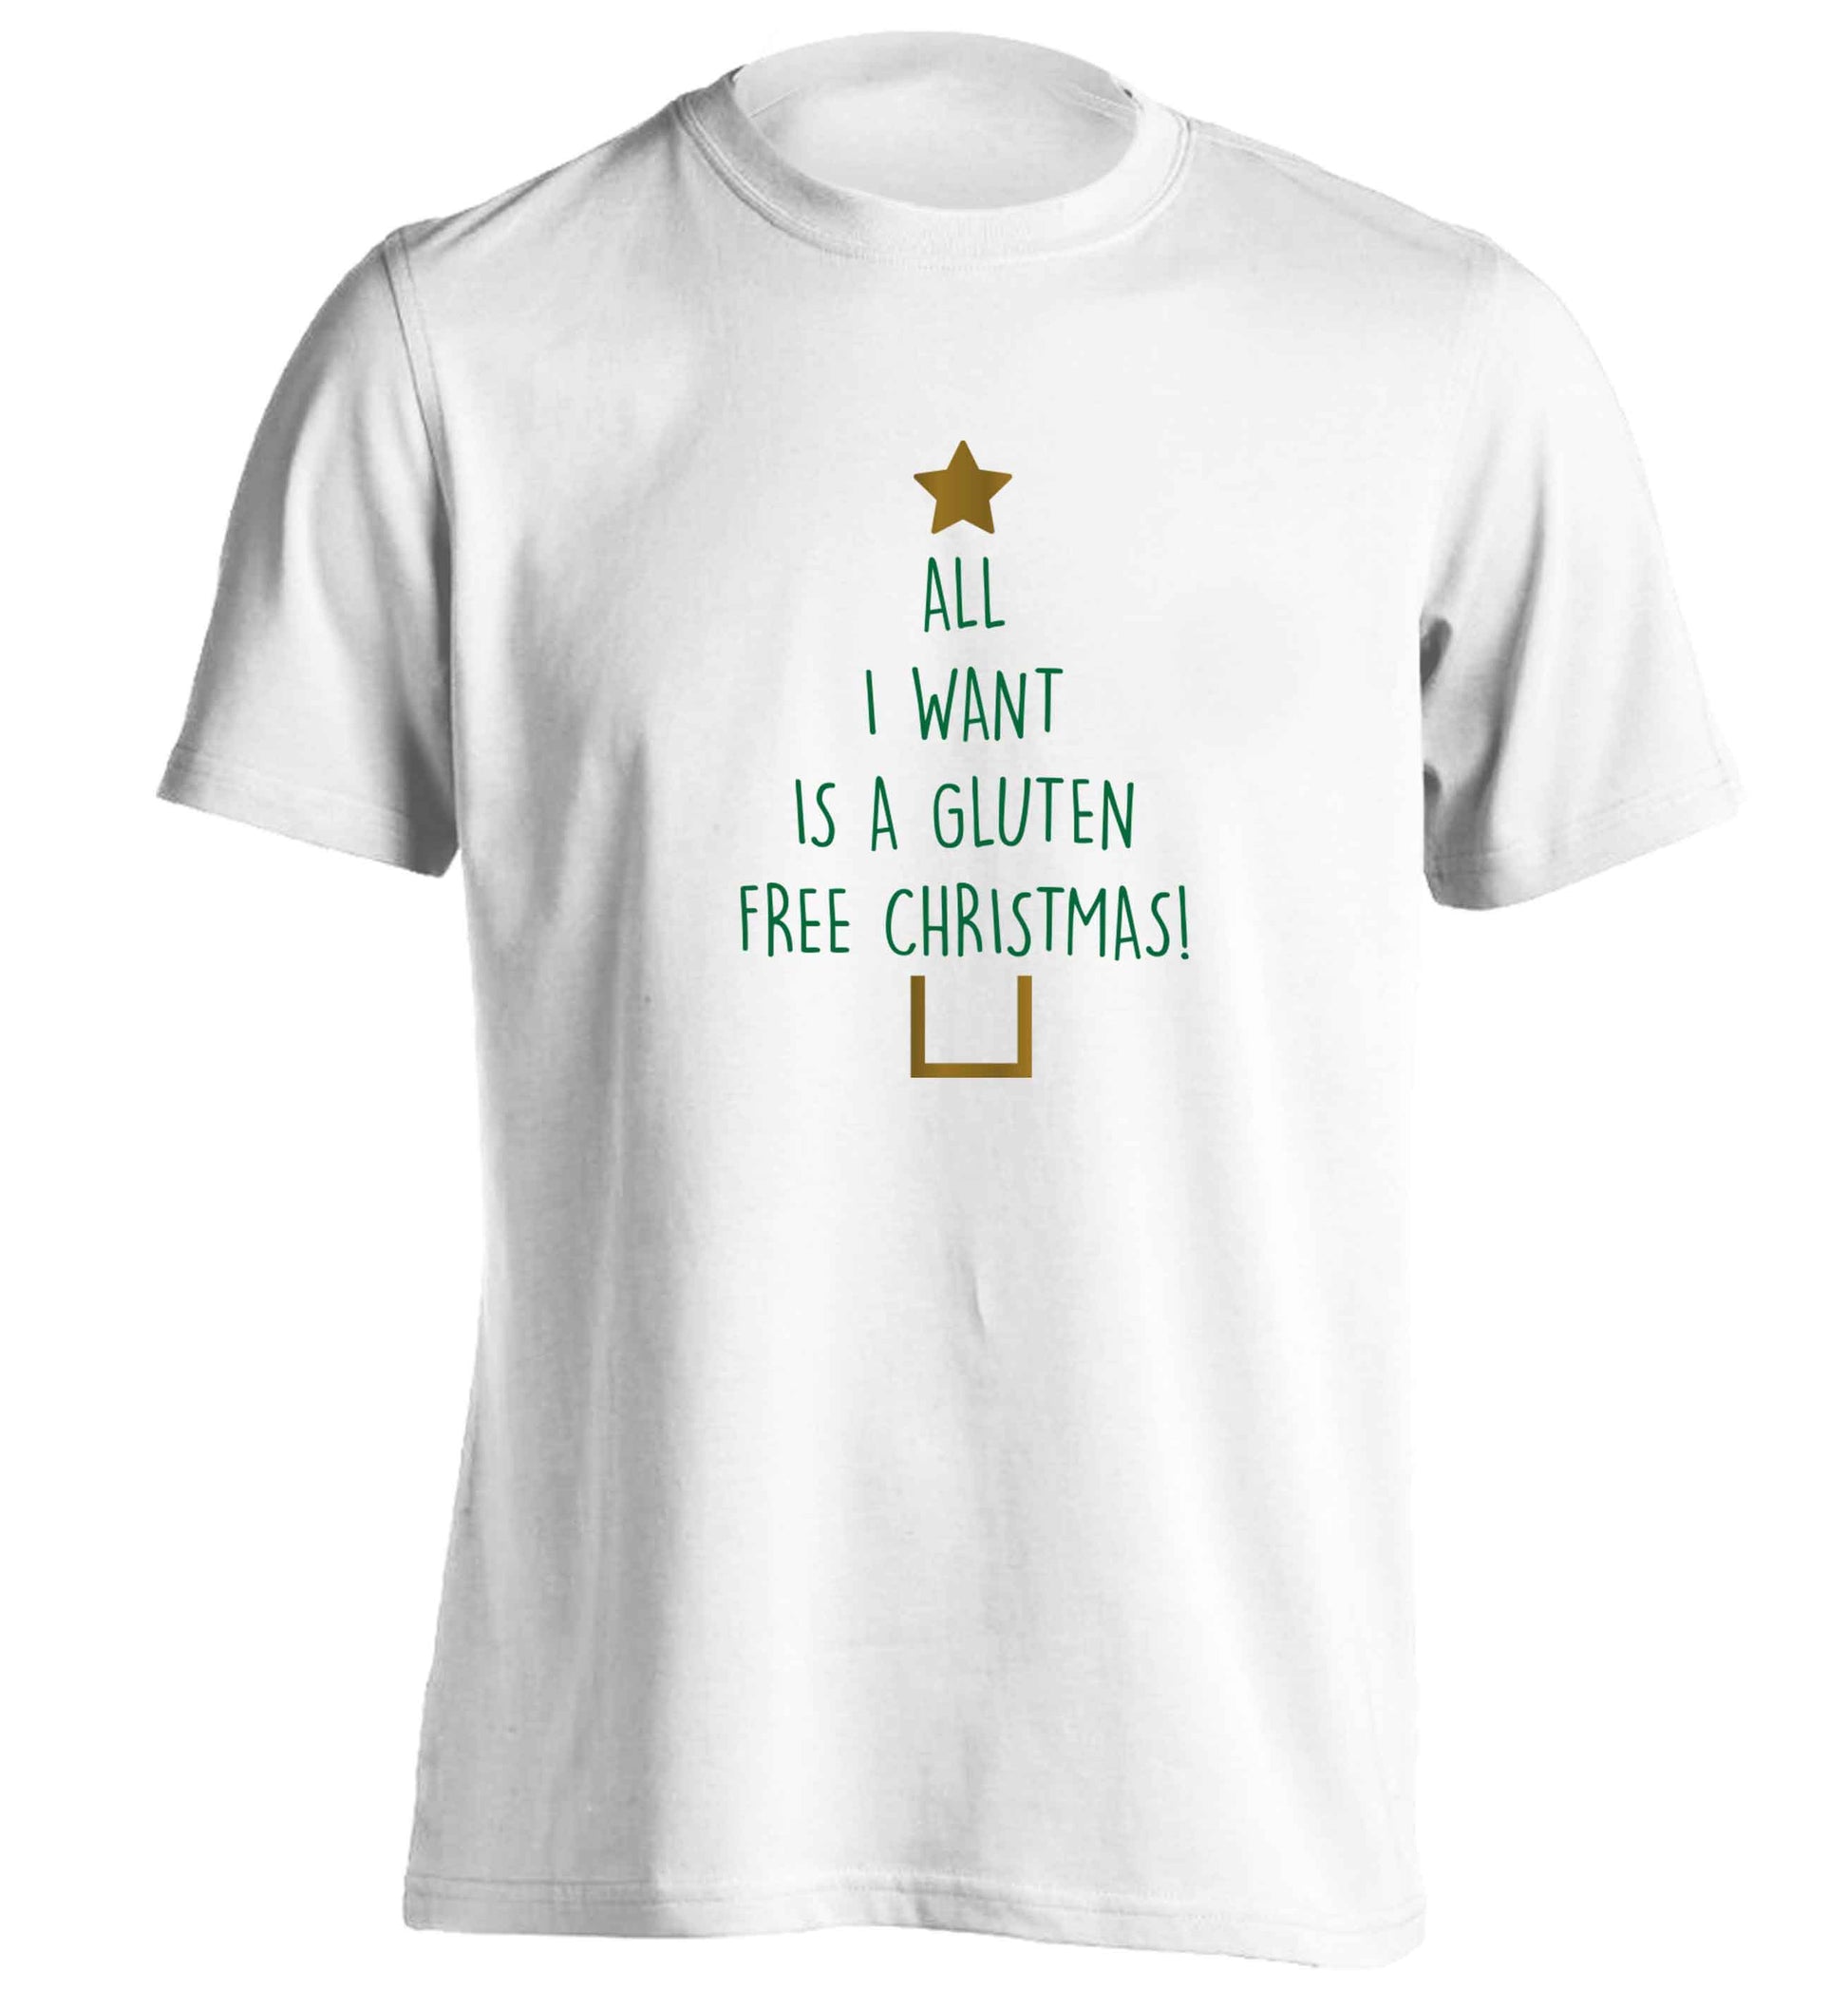 All I want is a gluten free Christmas adults unisex white Tshirt 2XL